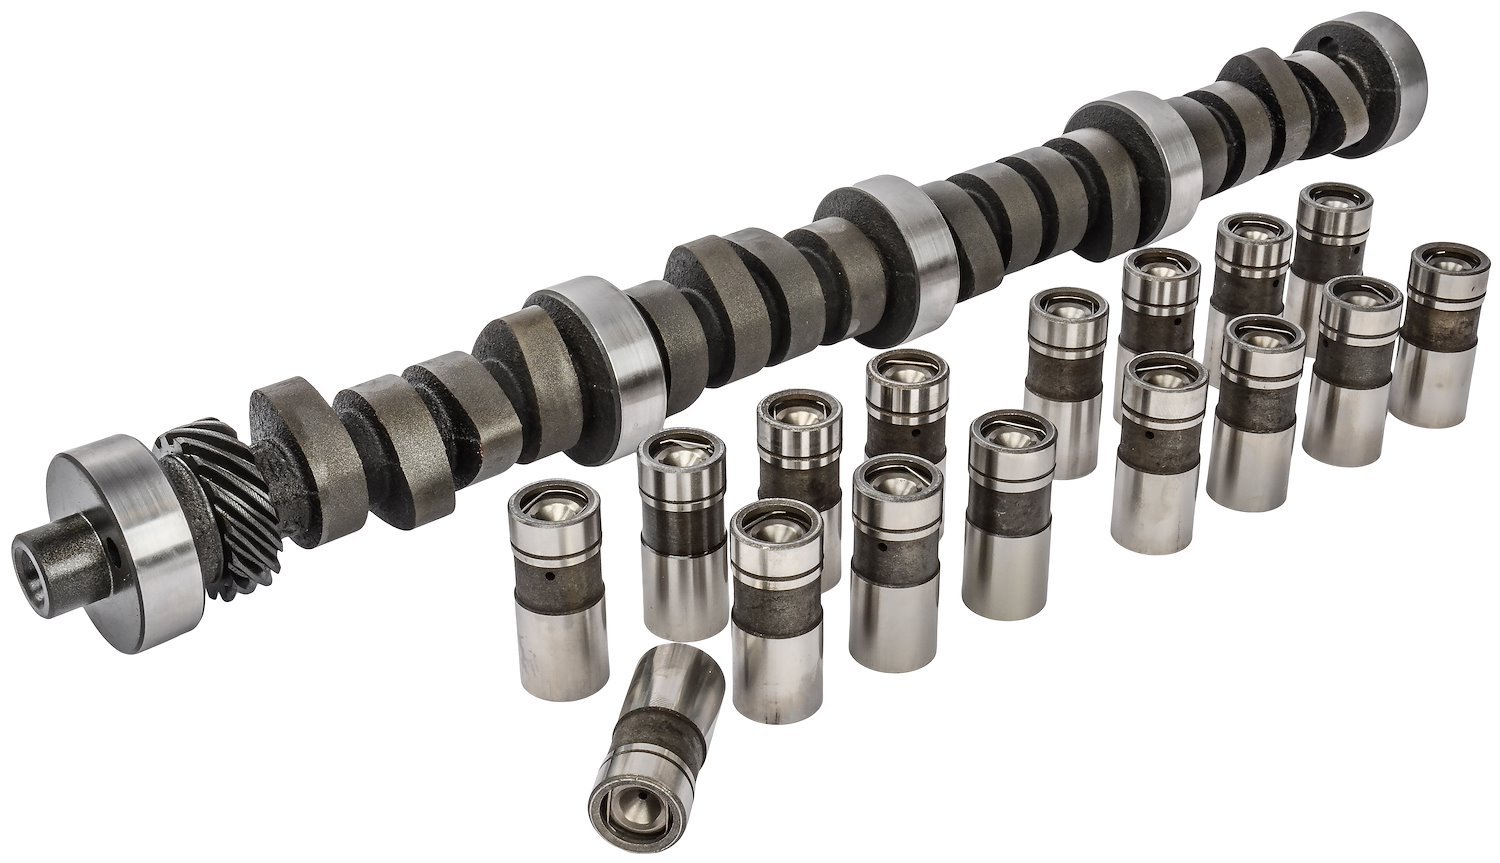 Hydraulic Flat Tappet Camshaft and Lifter Kit for 1962-1985 Small Block Ford 221-302 ci [Except 302 HO]